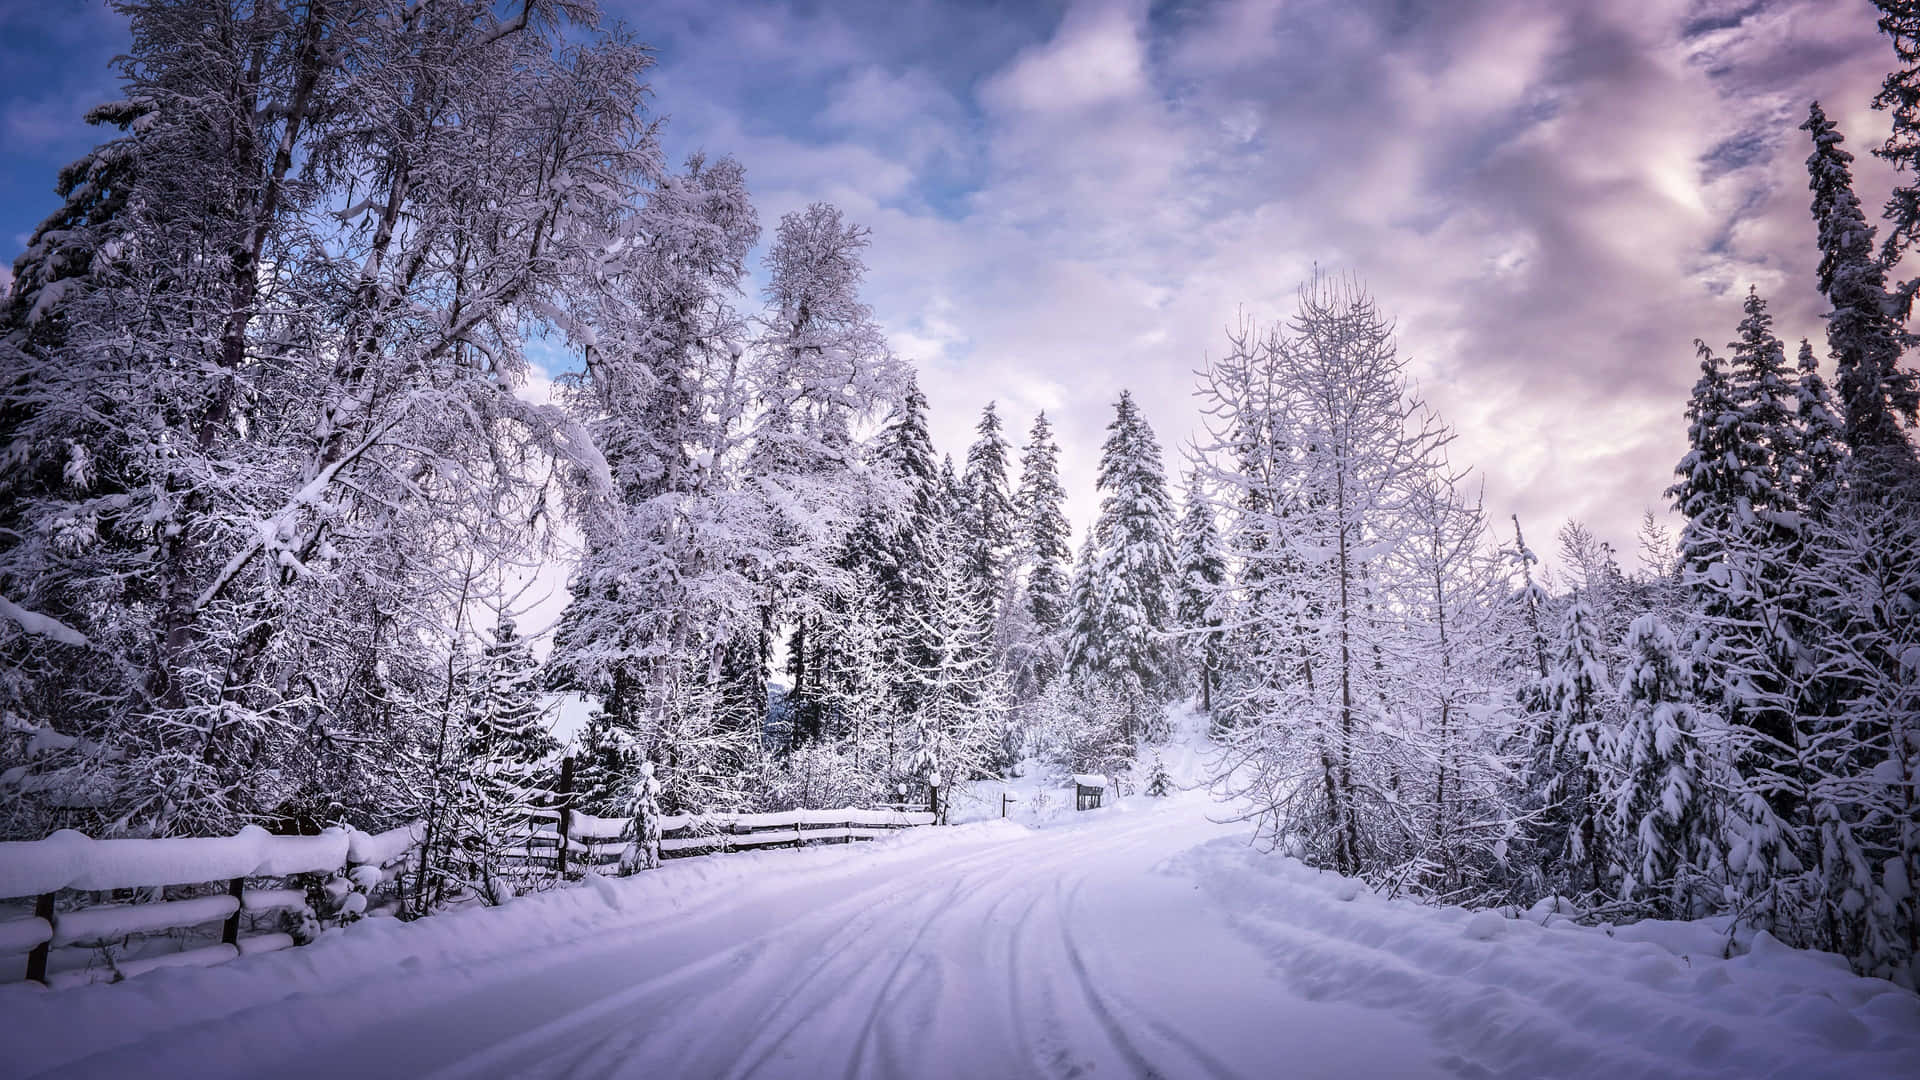 Snow-Covered Trees in a Magical Winter Wonderland Wallpaper